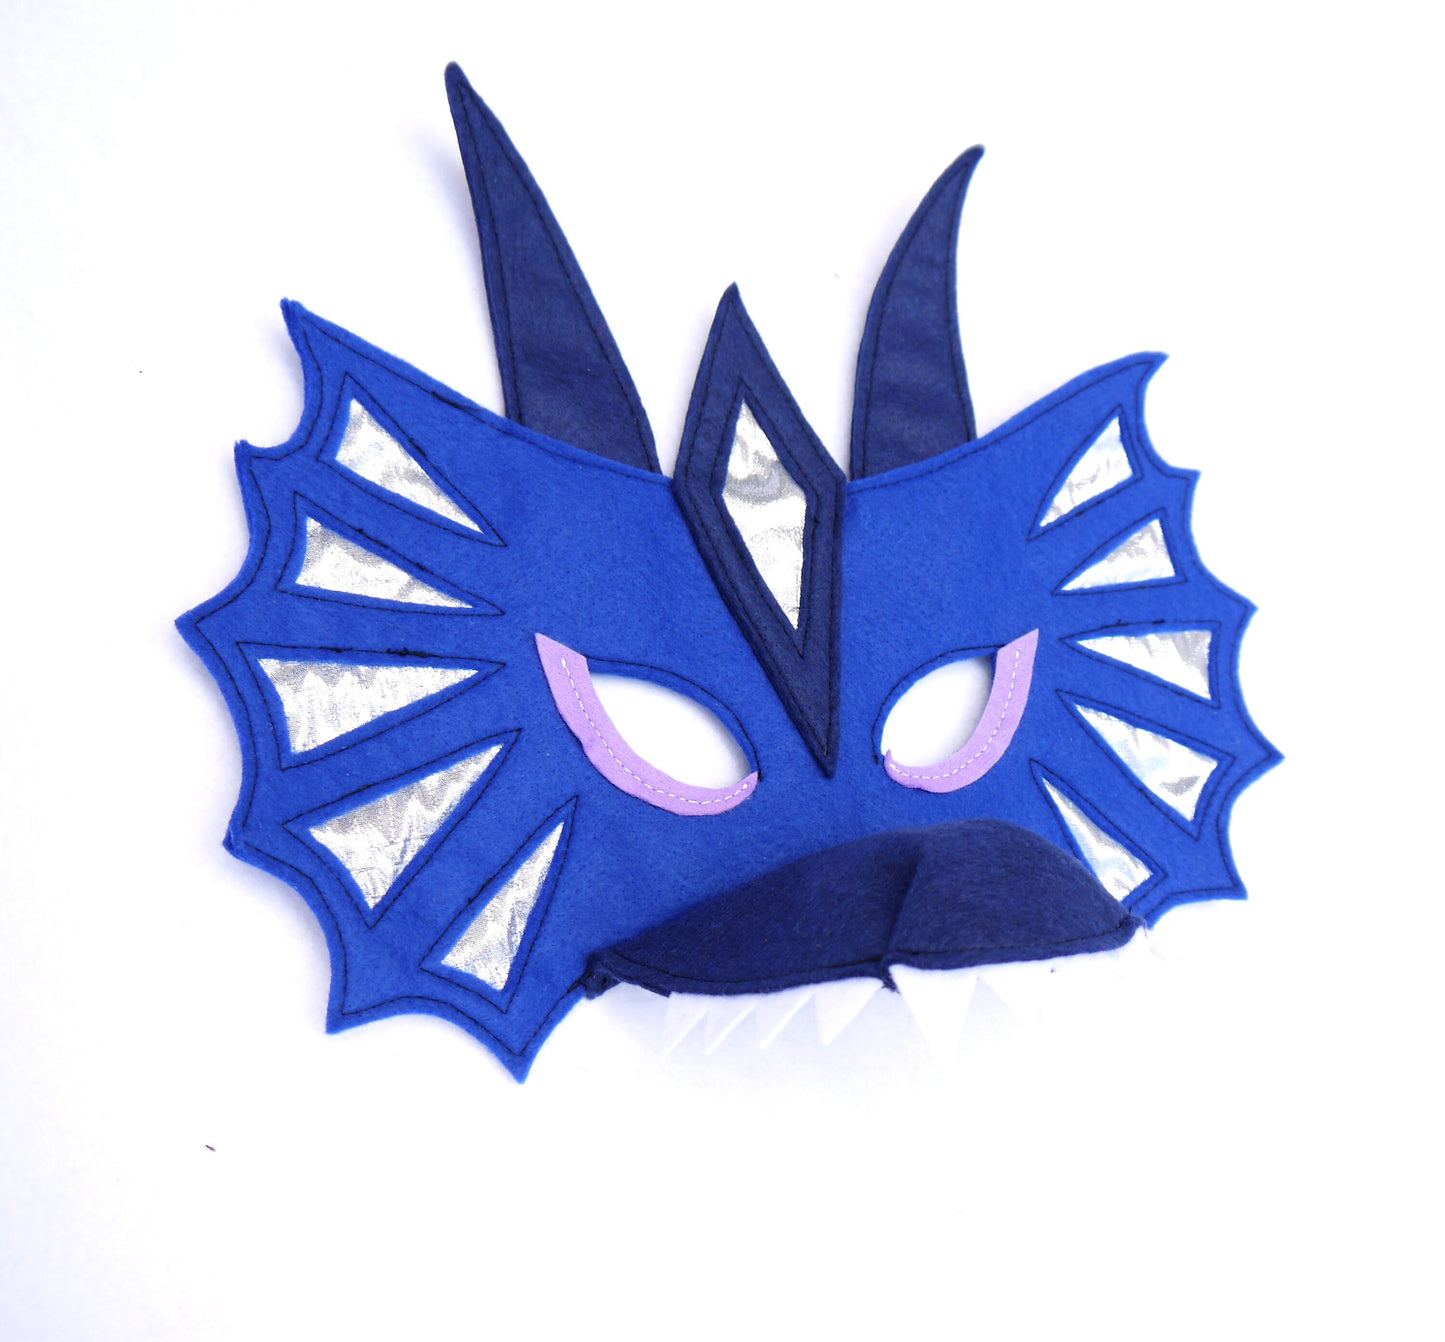 Dragon wings costume tail and mask, Book day costume, boys/ girls Blue dress up gift child and adult size, theatre production